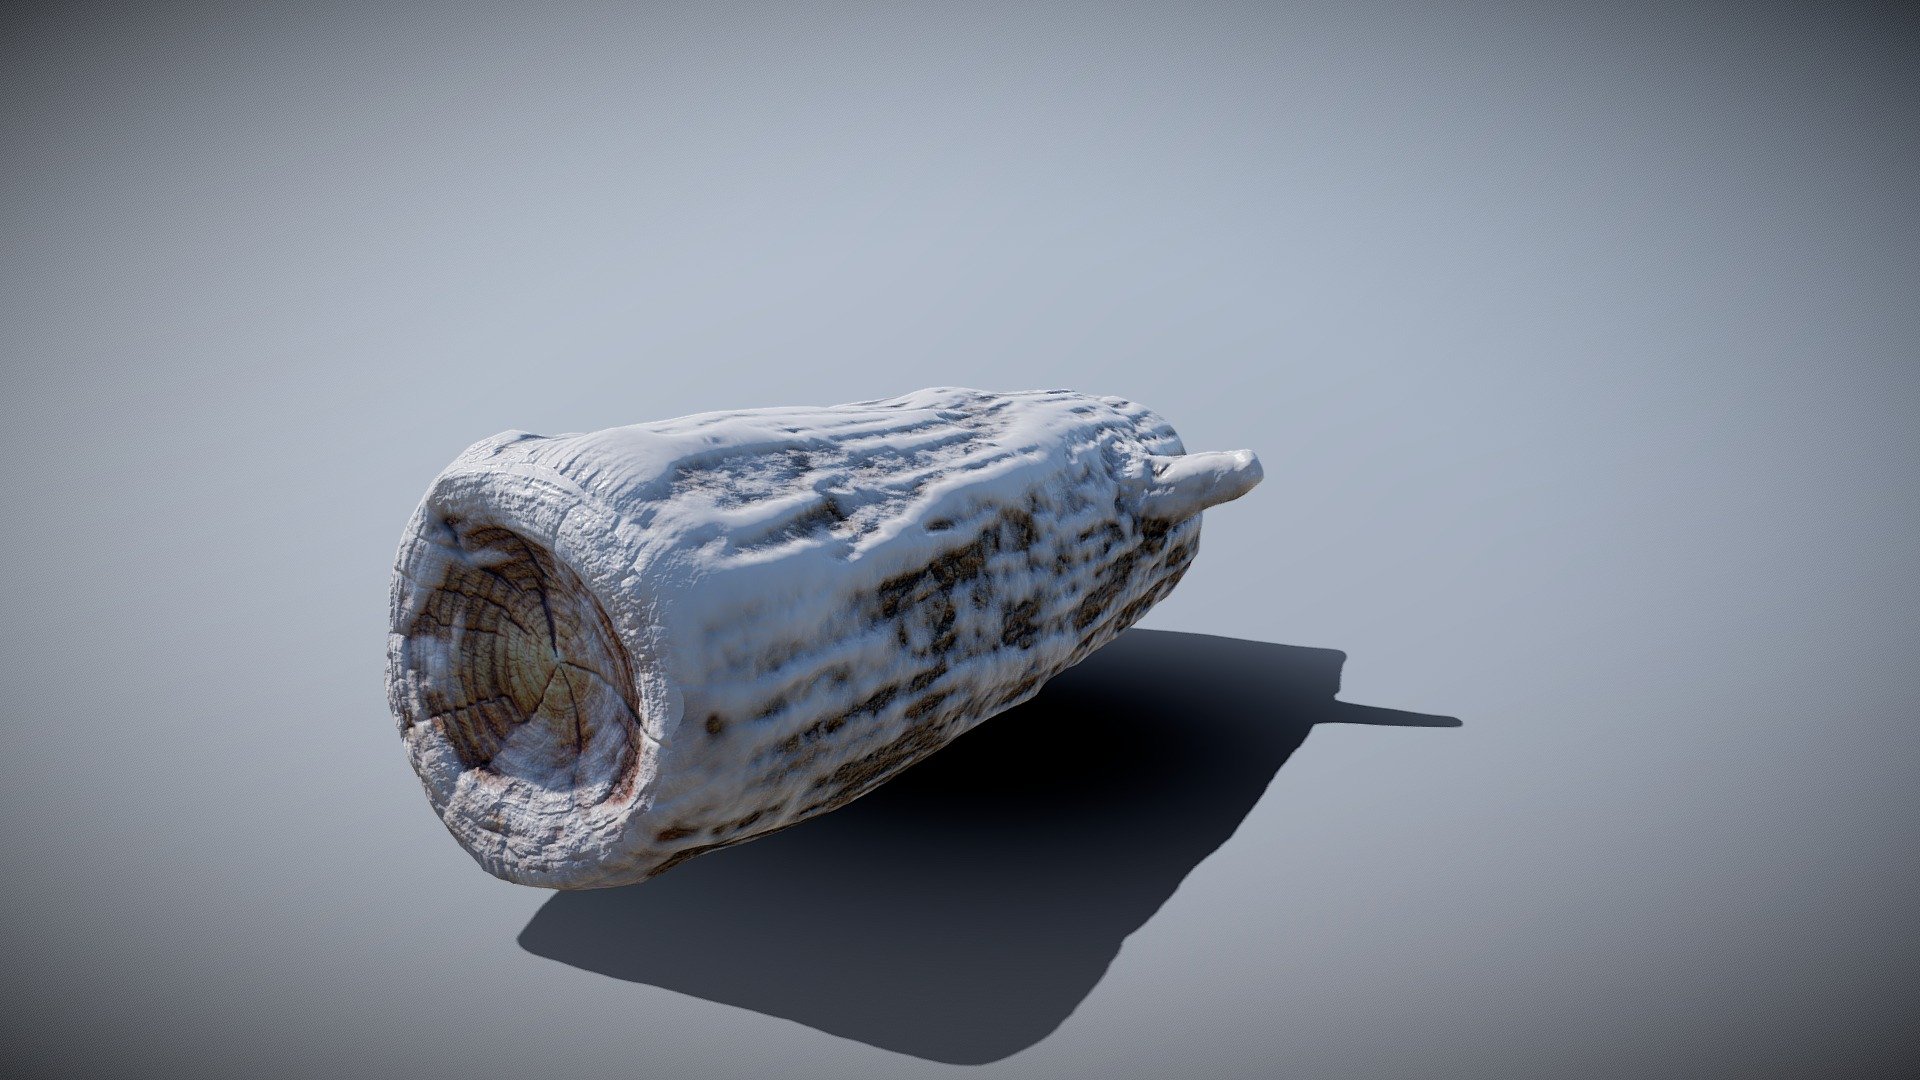 Modeled in Blender and textured in Substance Painter.

More practice for sculpting organic environment assets 3d model